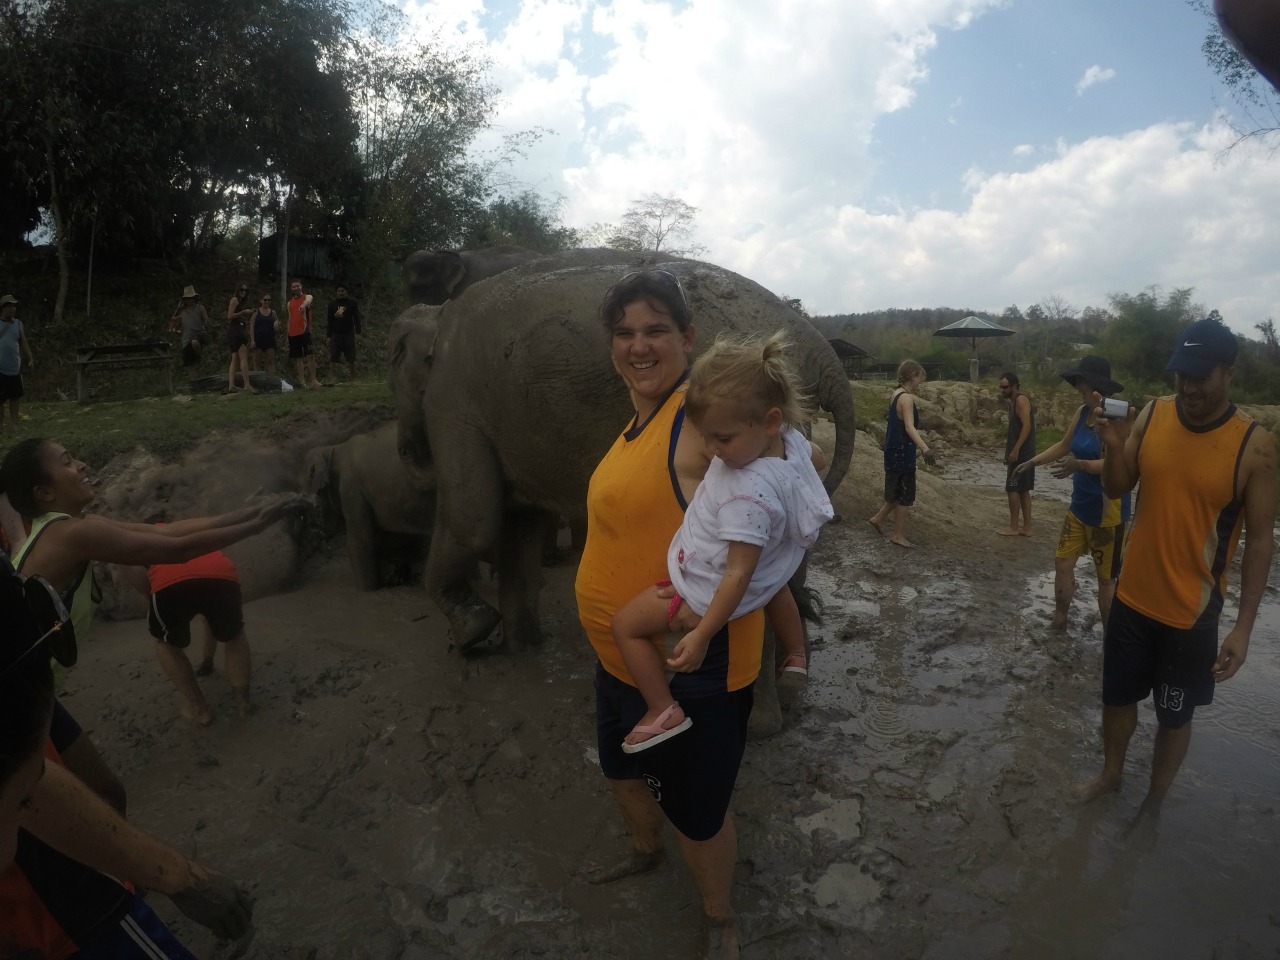 Playing in the mud with Elephants